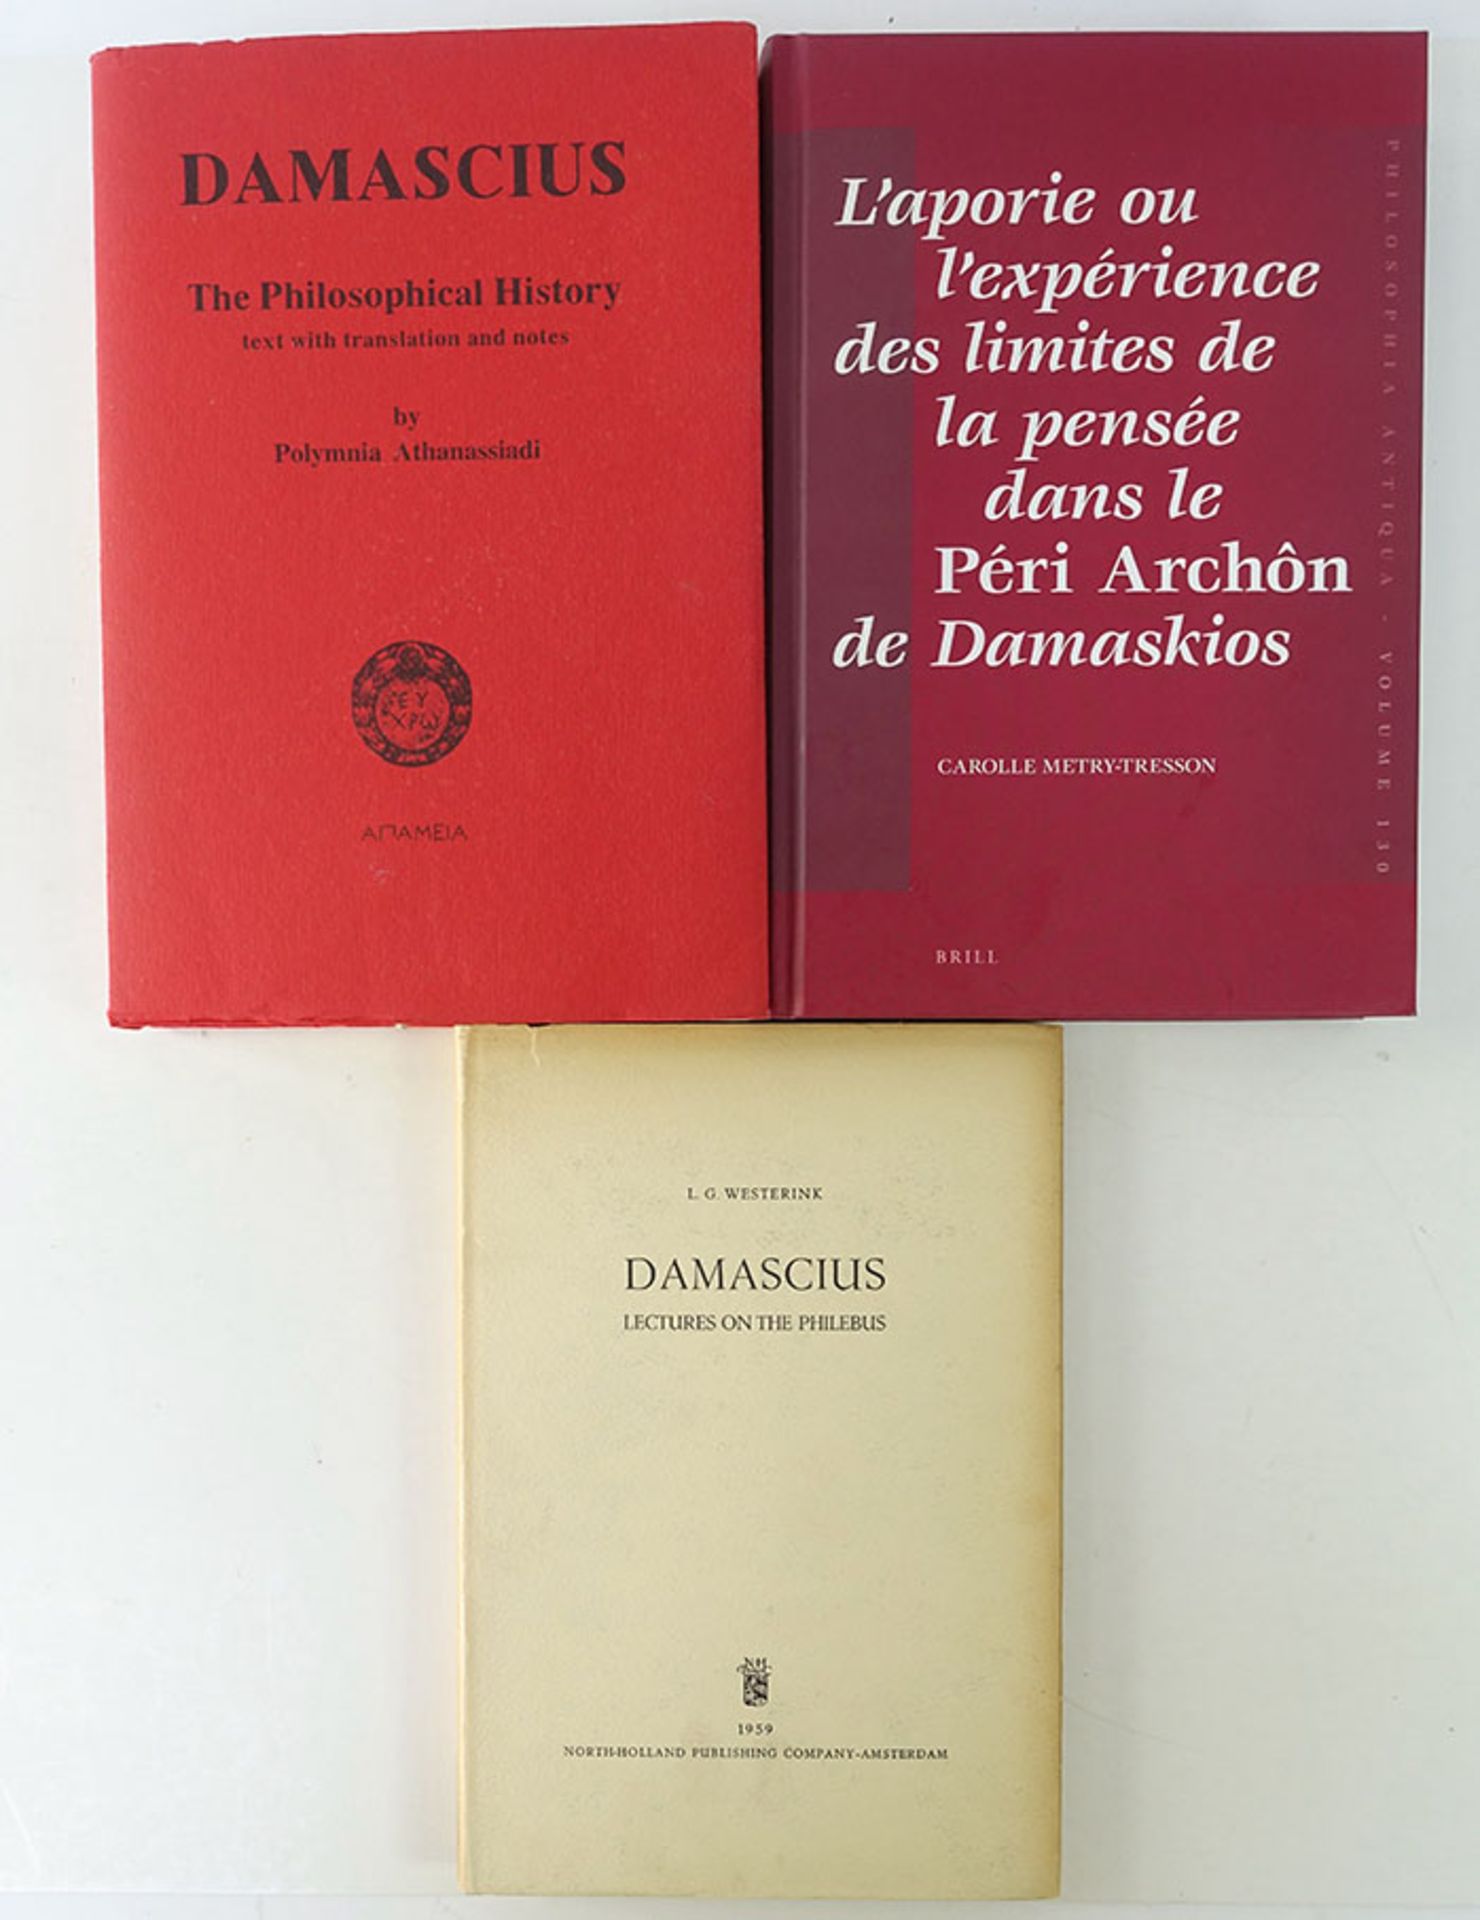 DAMASCIUS. The philosophical history. Text with translation and notes by P. Athanassiadi. (1999).